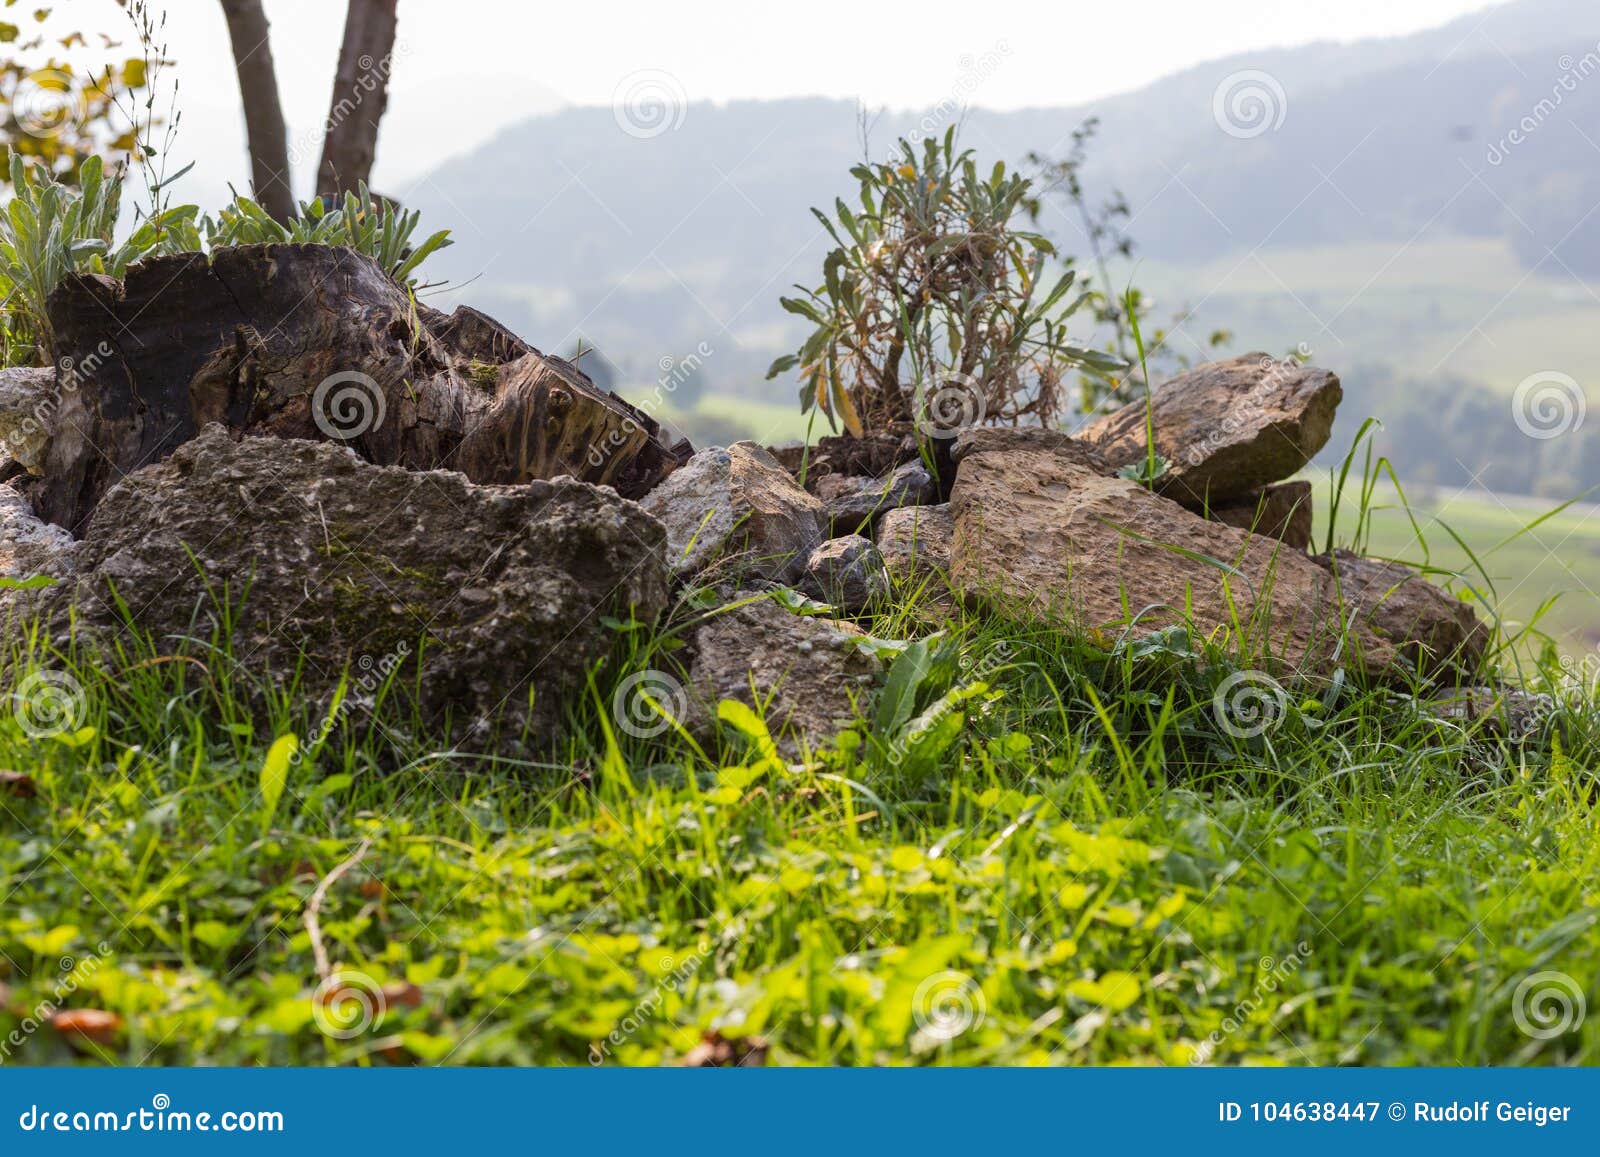 South German Cottage Garden Stock Image Image Of Stone